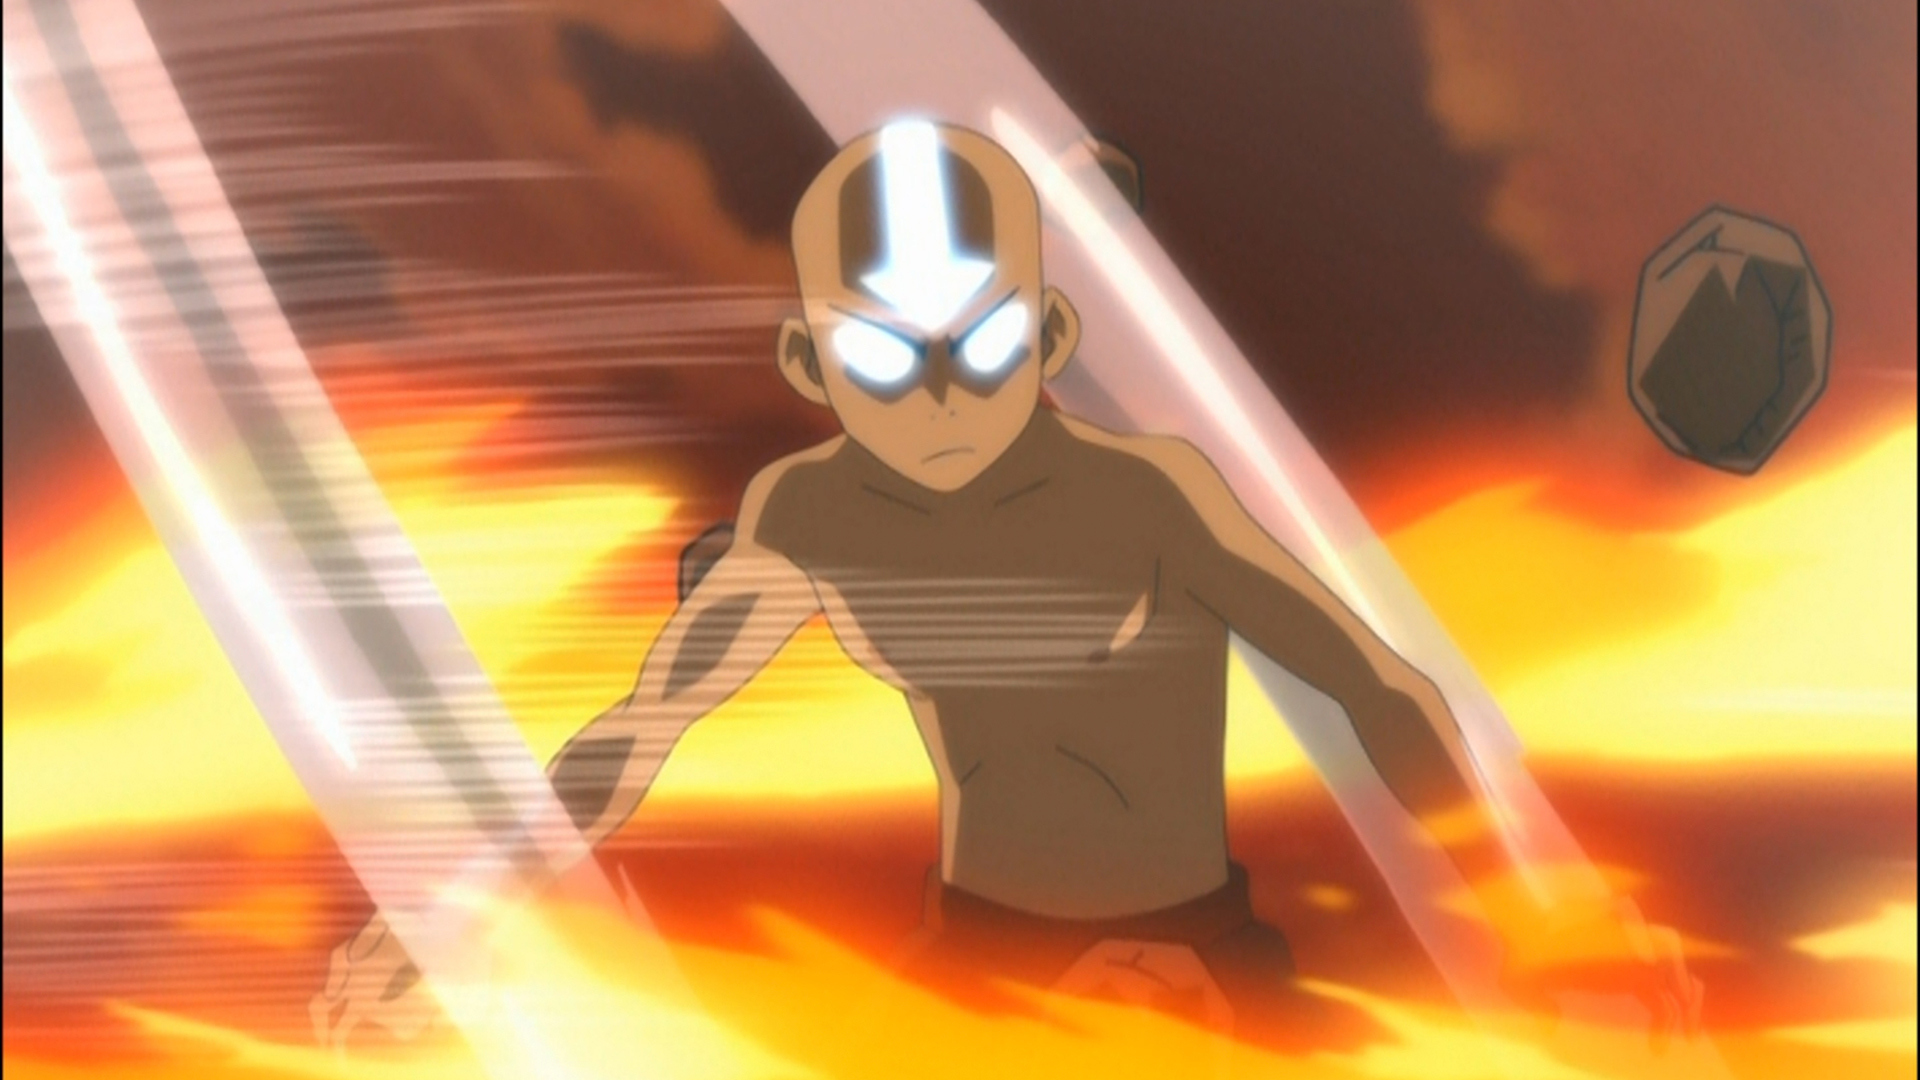 An Extended Avatar The Last Airbender Universe Is In The Works  Arts   The Harvard Crimson